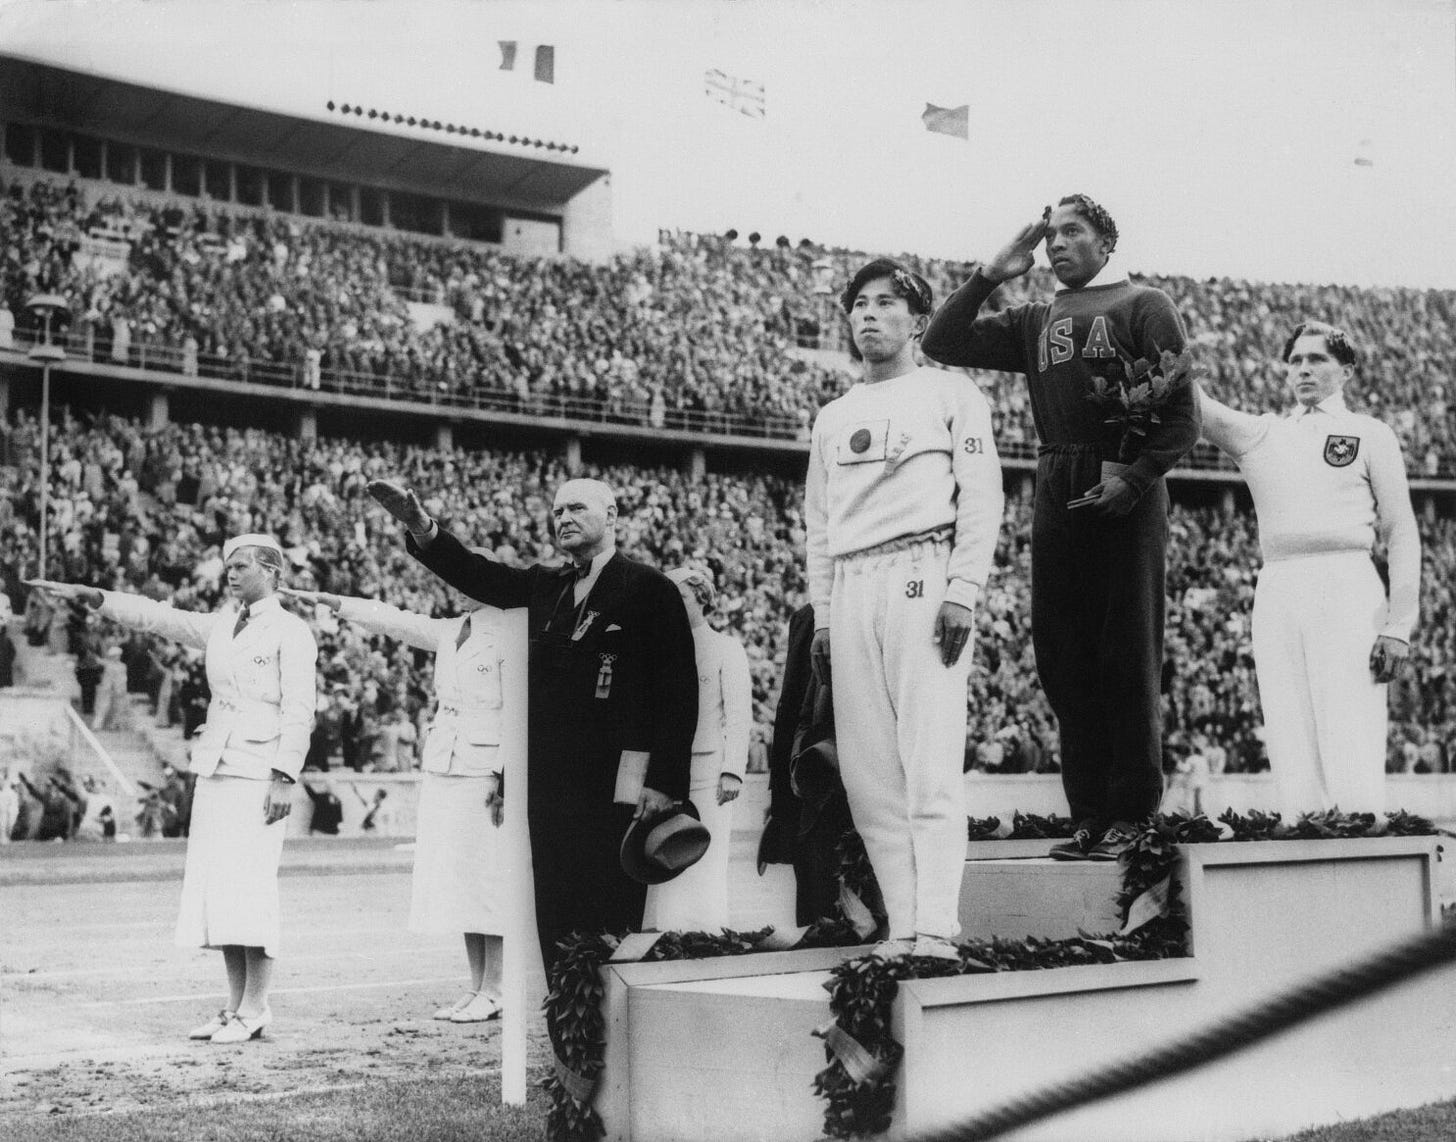 Black Americans star in front of Hitler at Berlin Olympics | AP News